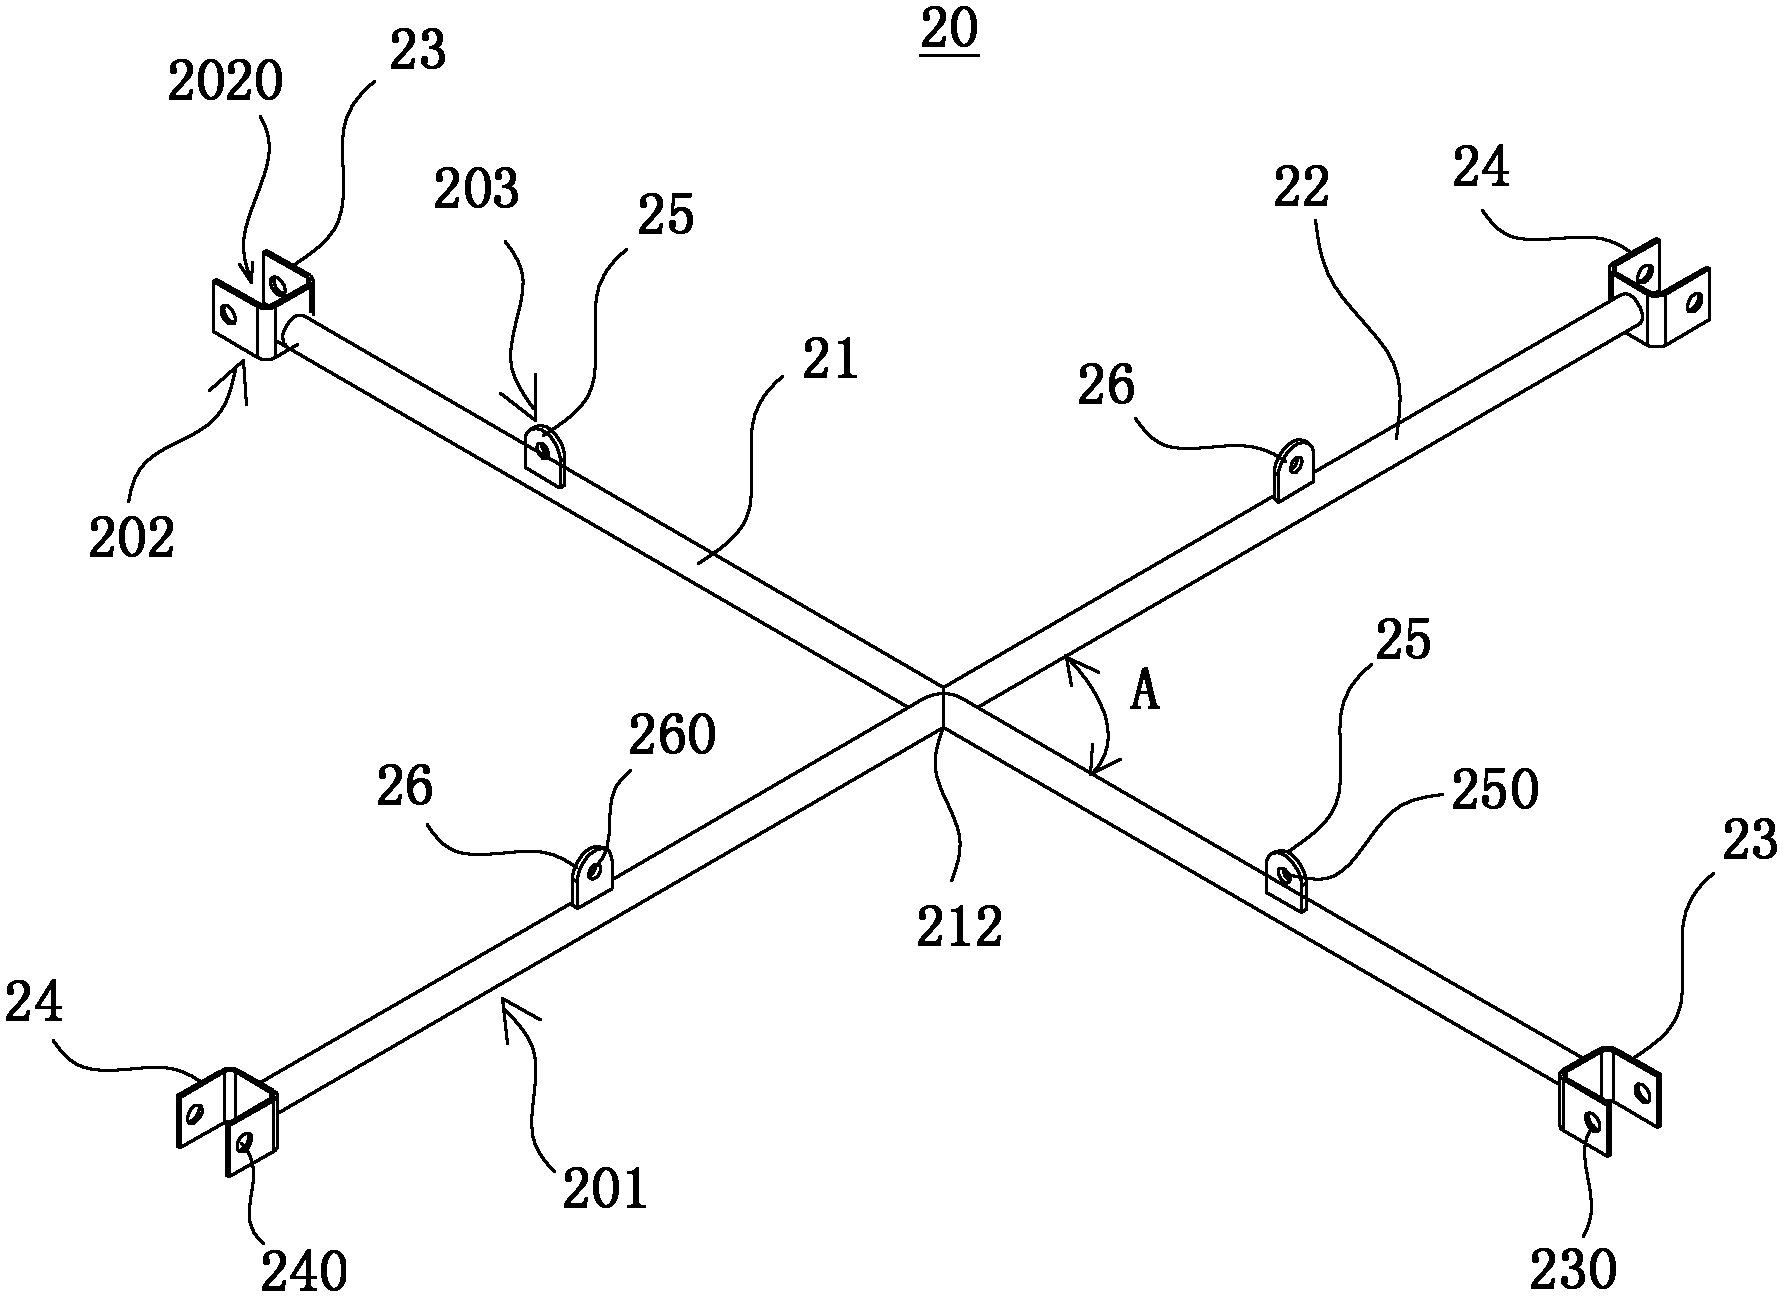 Tool structure used for installing lifting rigging, system and method